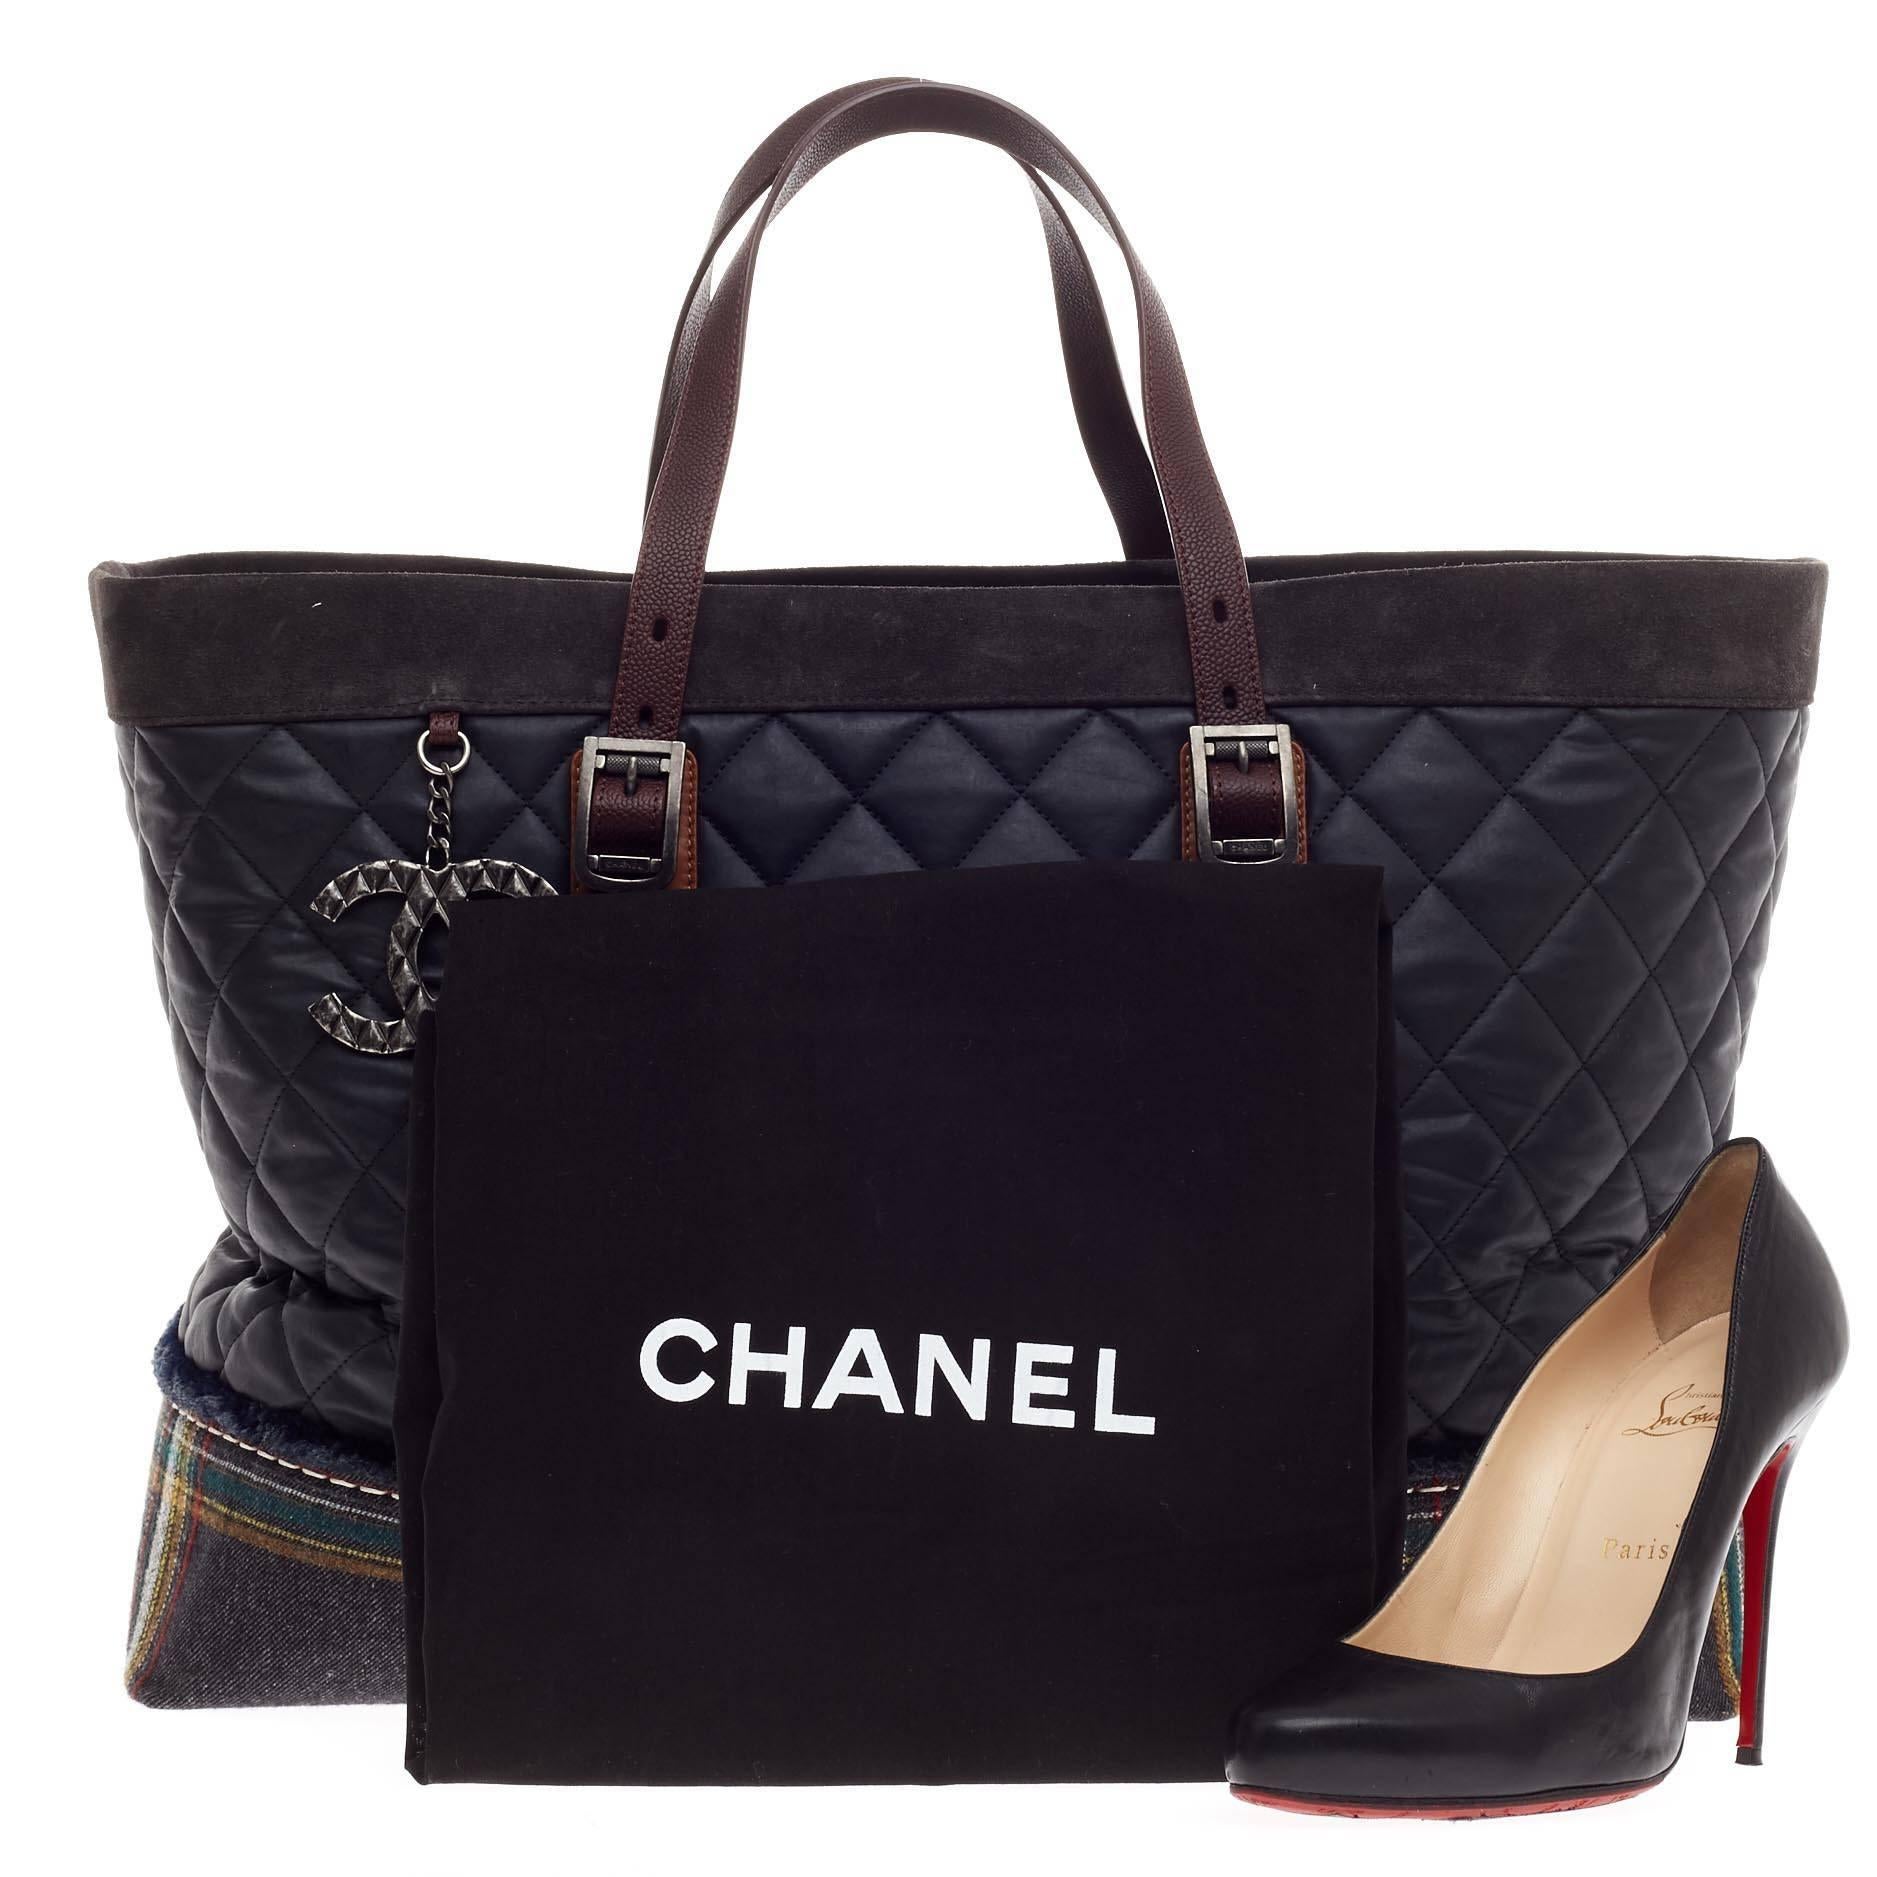 This authentic Chanel Paris-Edinburgh Tote Mixed Leather with Flannel presented in the brand's pre-fall Paris-Edinburgh Metiers D’Art 2012 Collection showcases a medieval-inspired aesthetic with scottish flair. Constructed from Chanel’s signature